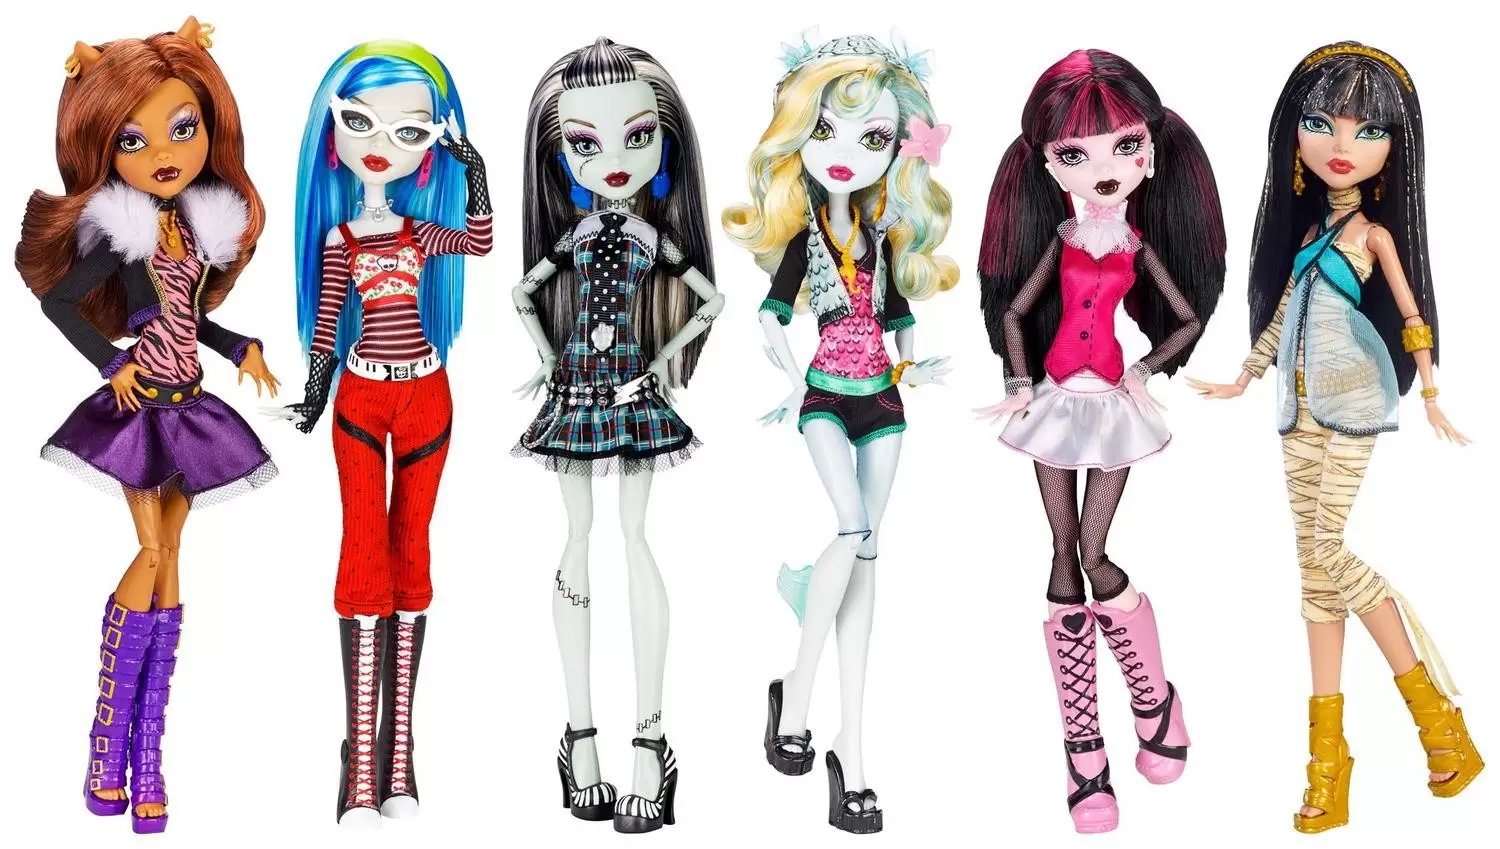 Monster High Dolls - Original Ghouls Collection (6-pack) - Basic